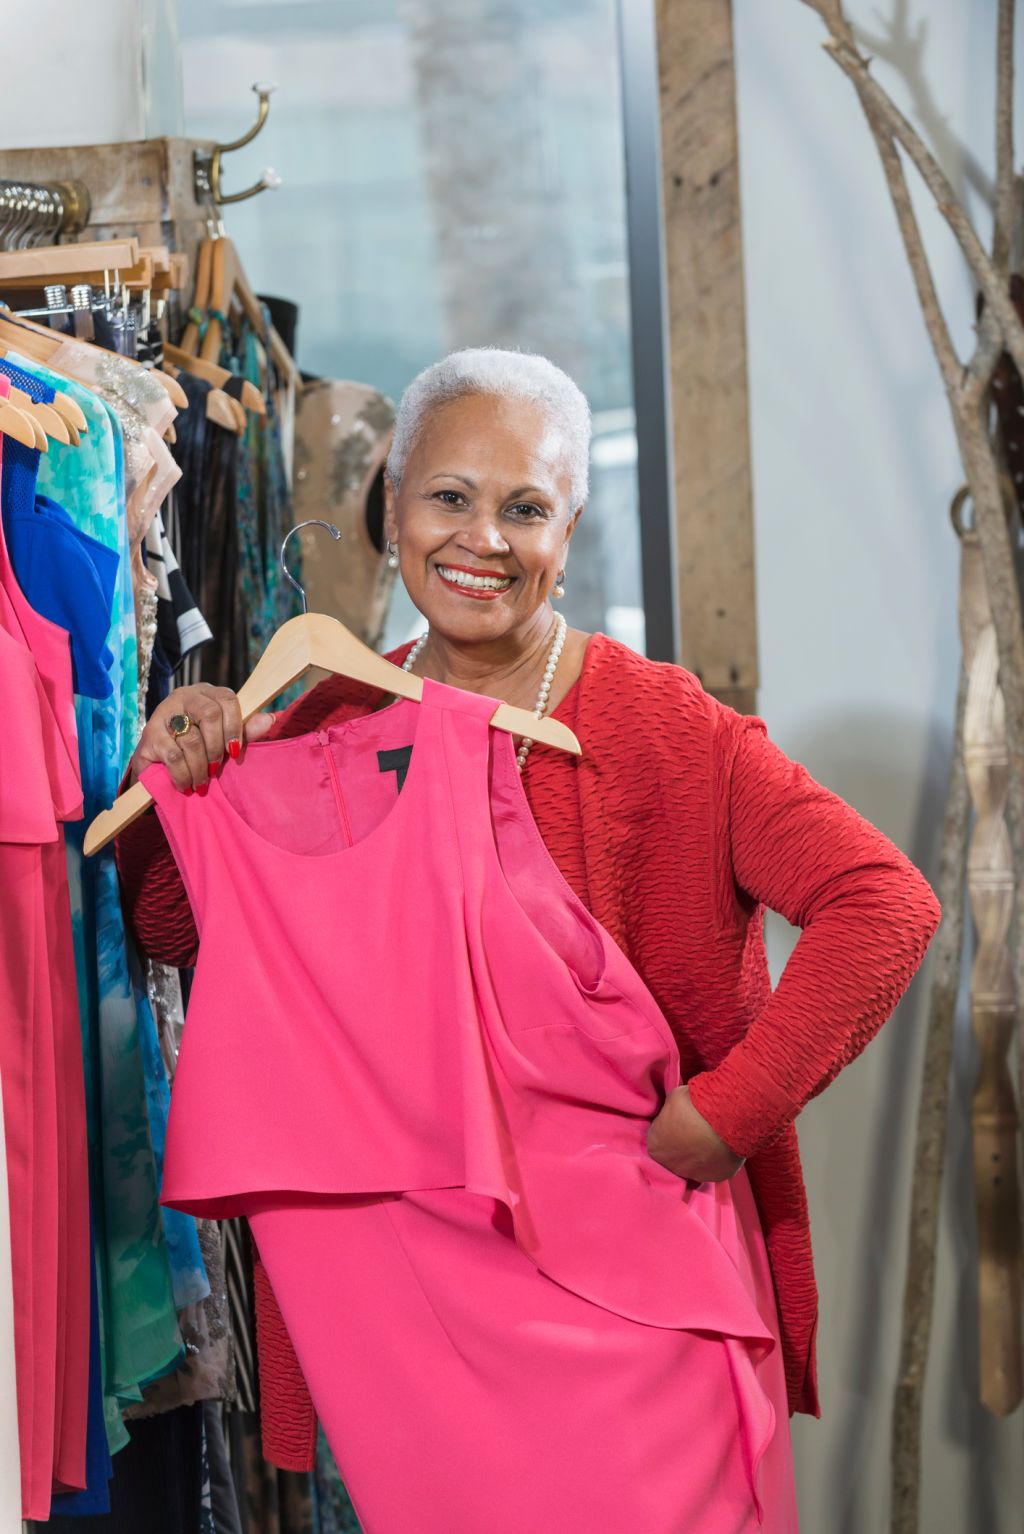 Mature black woman shopping in a clothing store